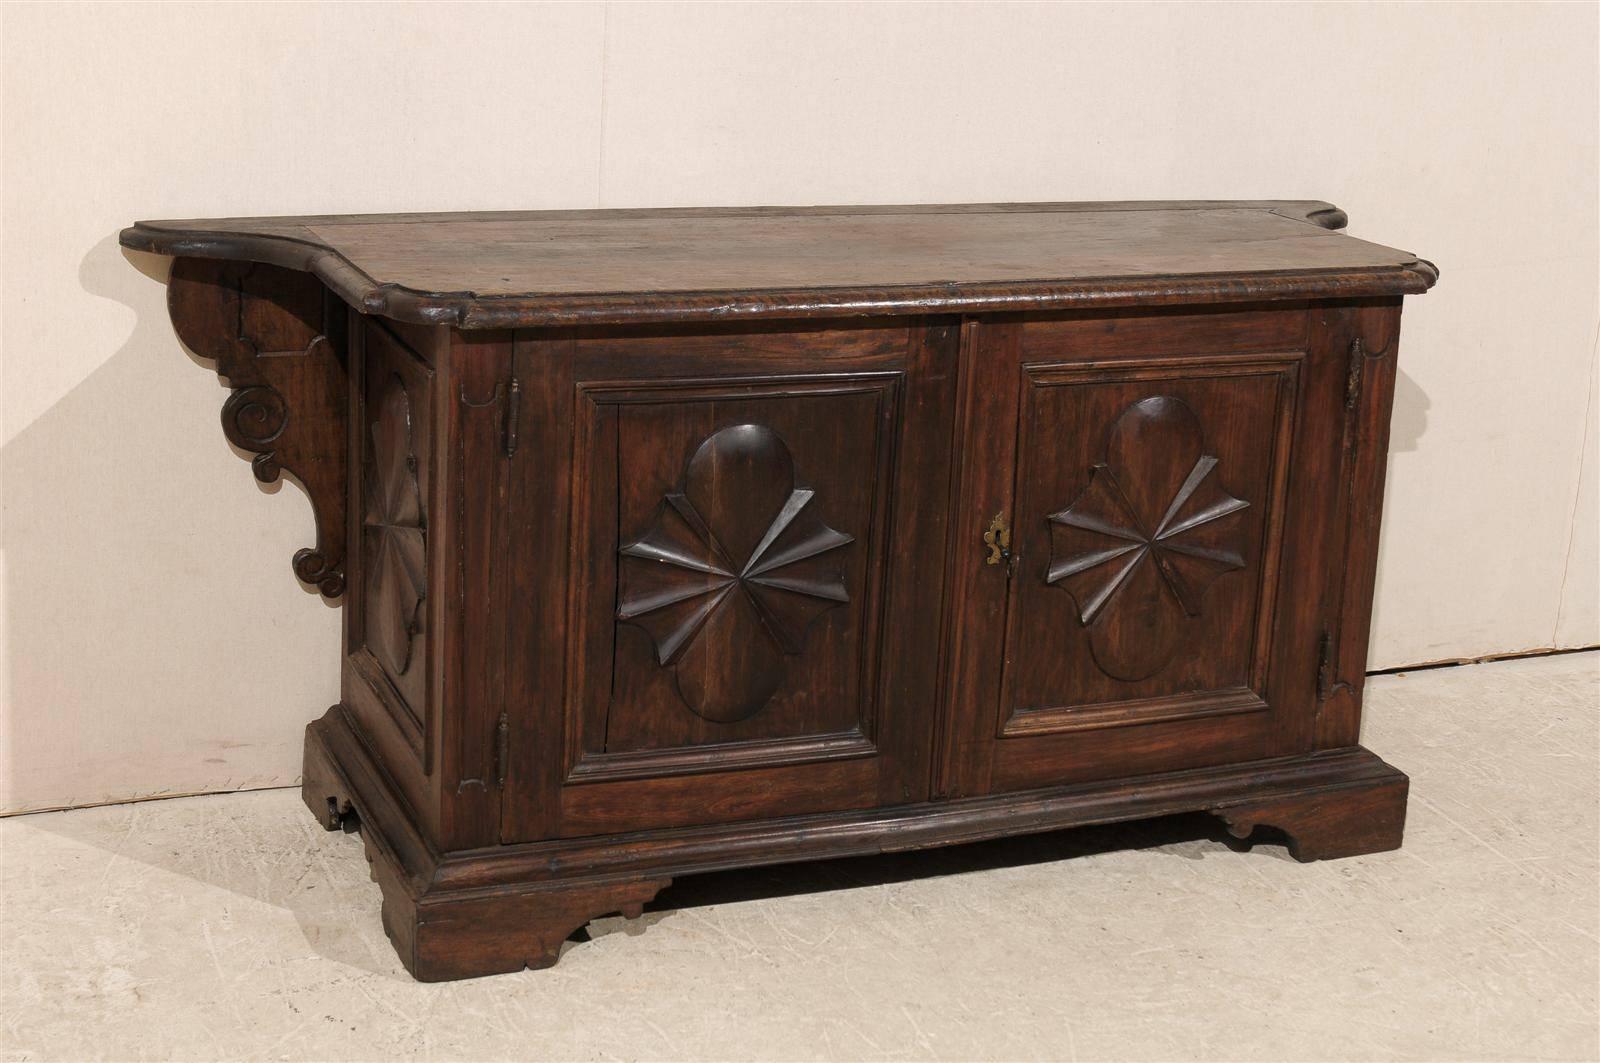 18th Century and Earlier 18th Century Italian Rich Walnut Wood Credenza with Sunburst and Volute Motifs